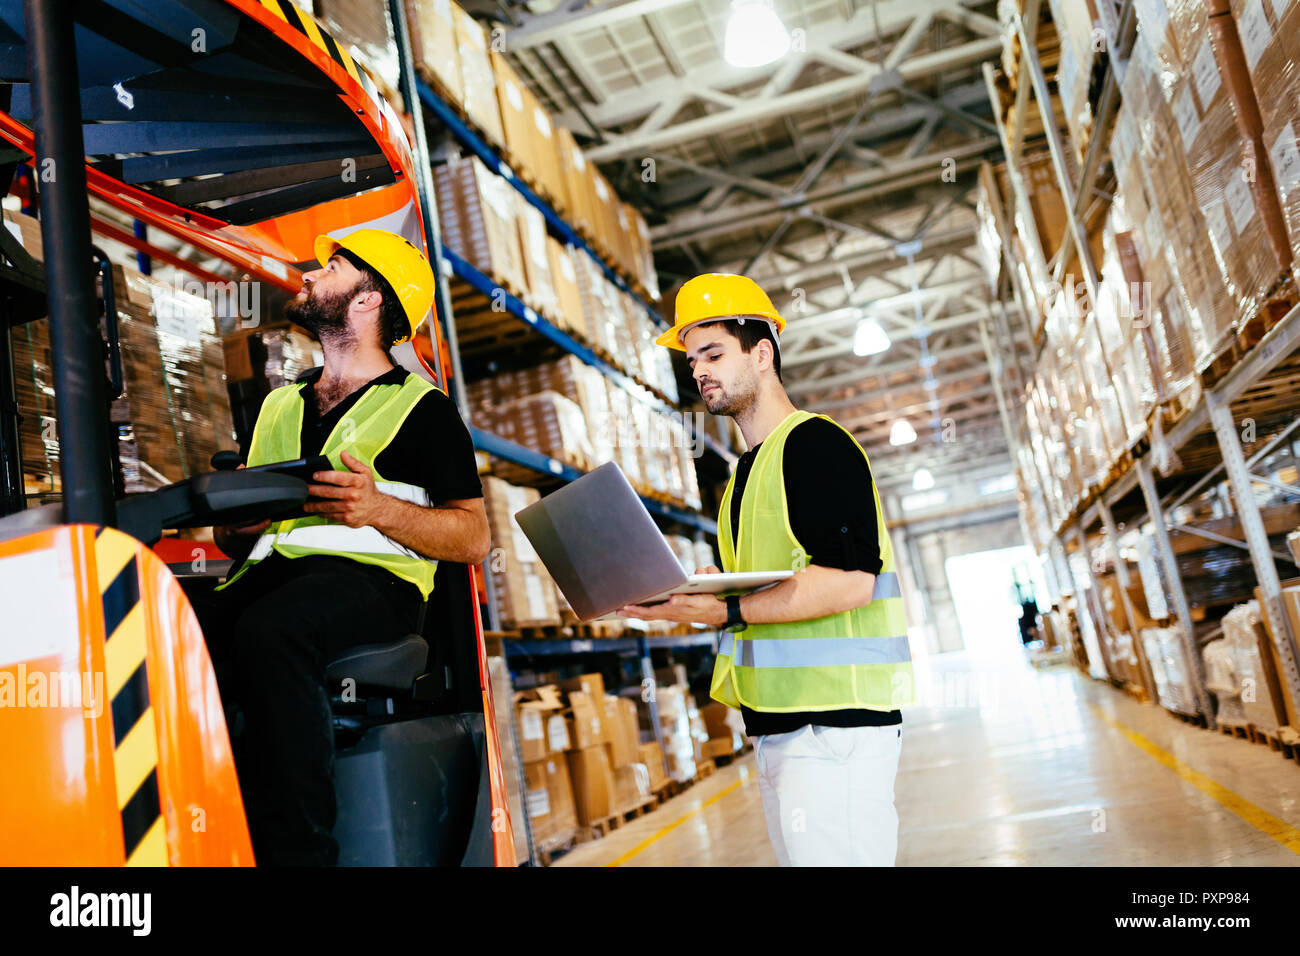 Warehouse Workers Working Together With Forklift Loader Stock Photo Alamy